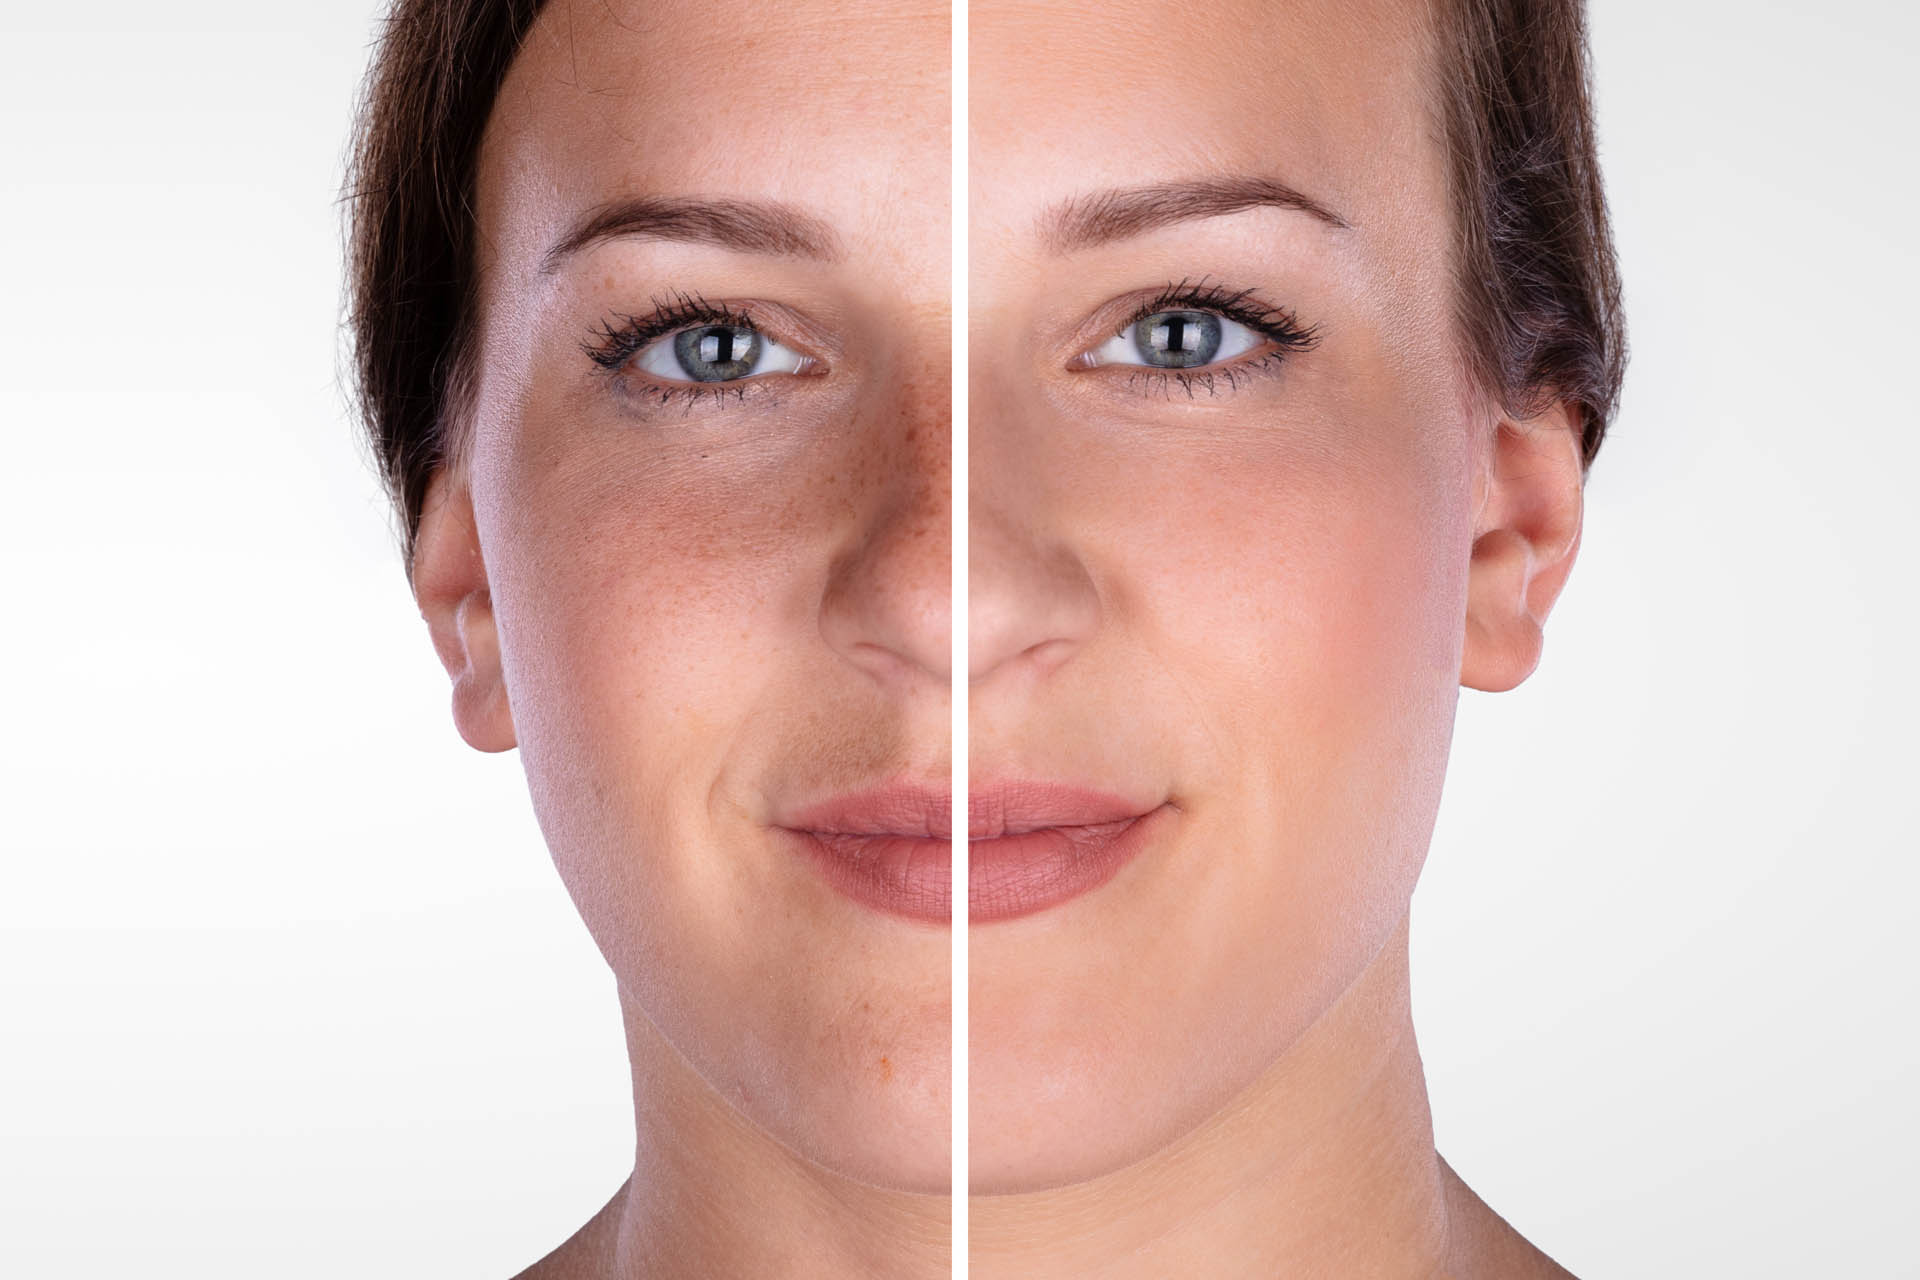 Before and After of Botox and Filler Certification Classes